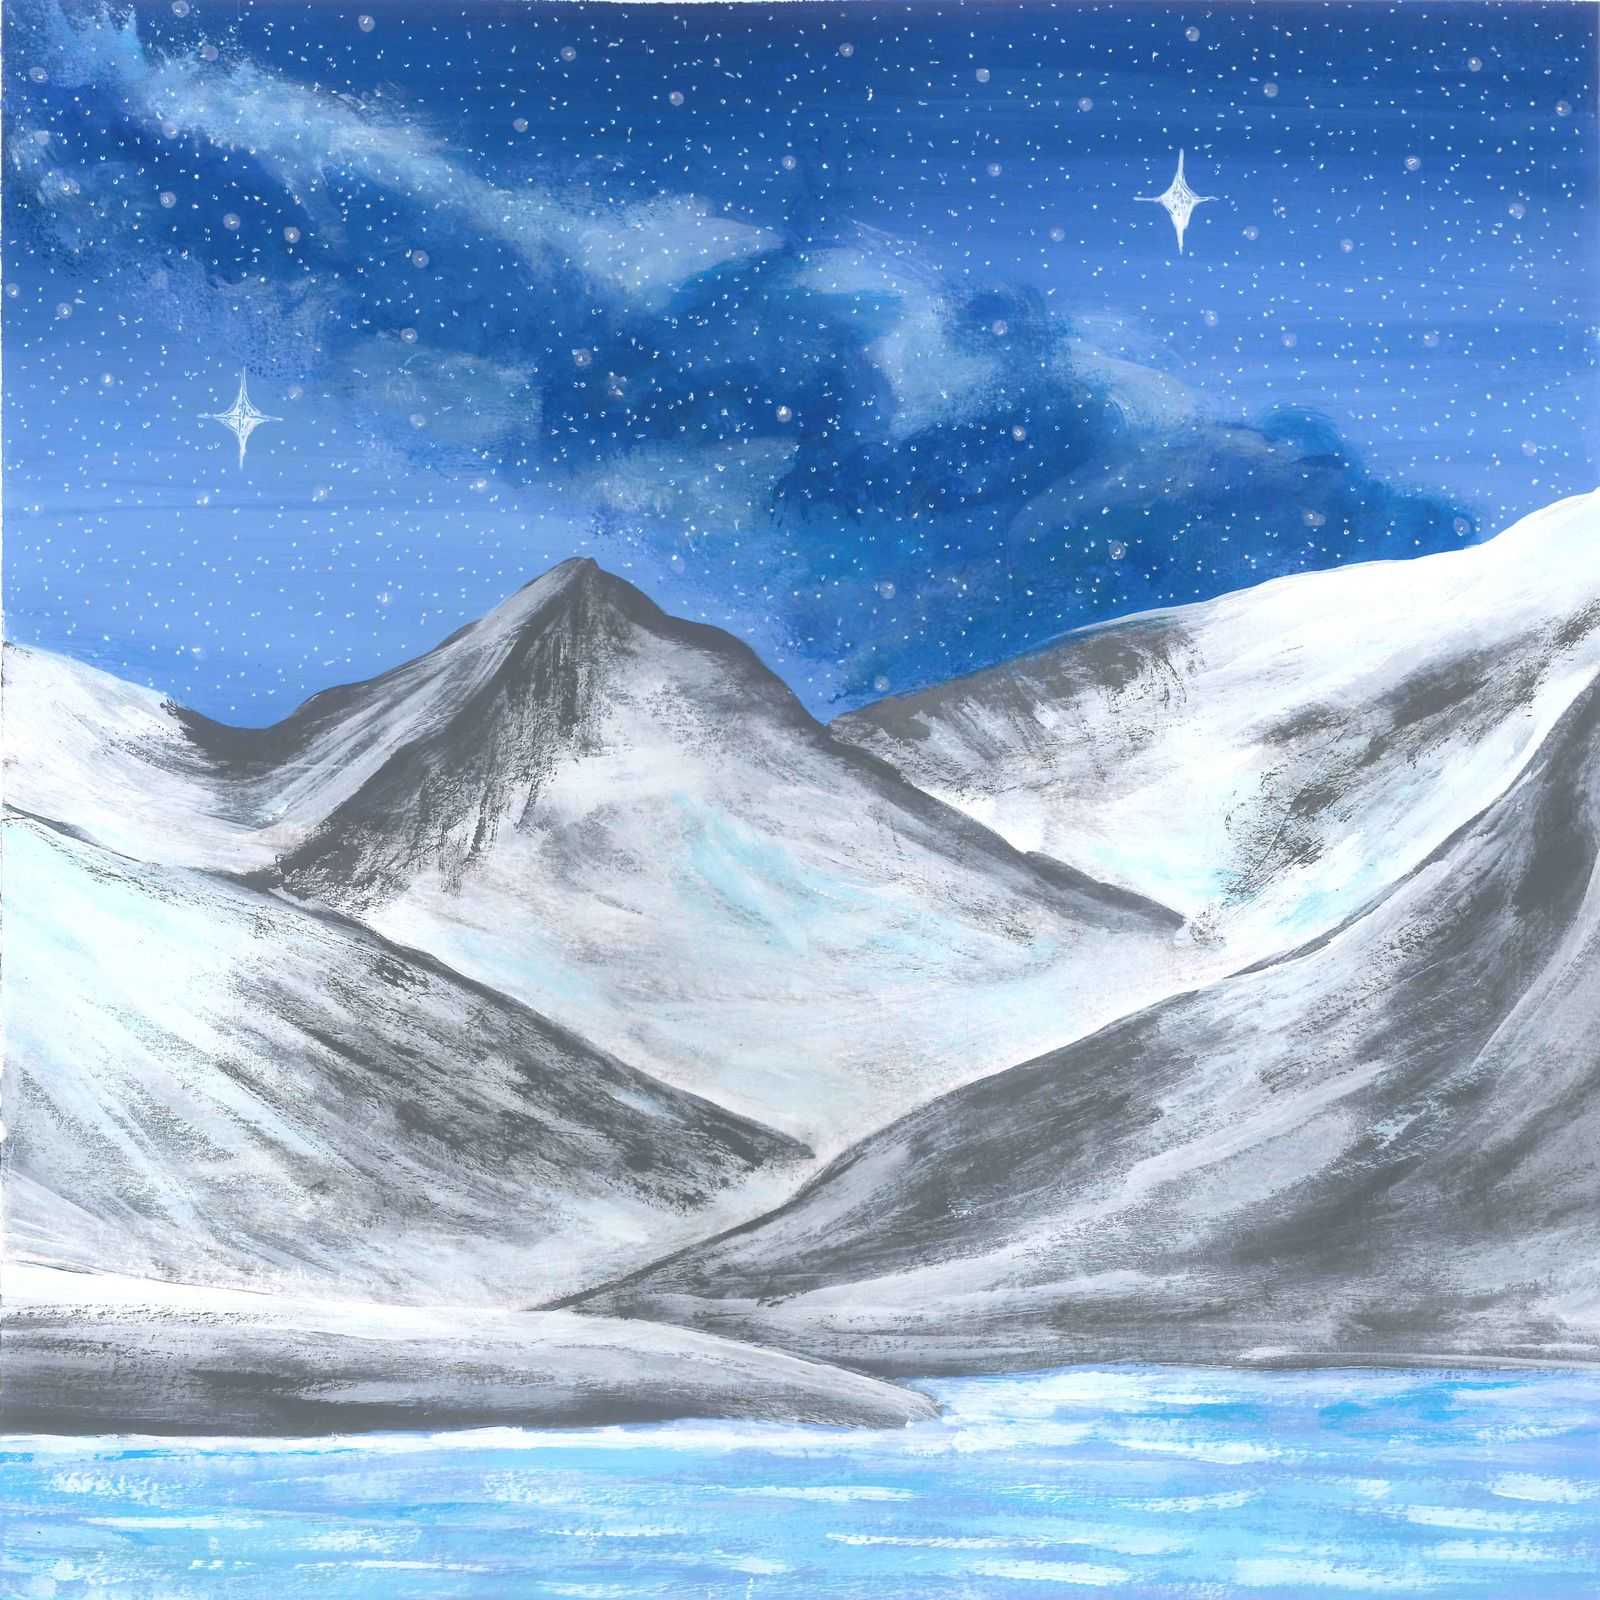 Calm Sea in an Ice Cave - nature landscape painting - earth.fm